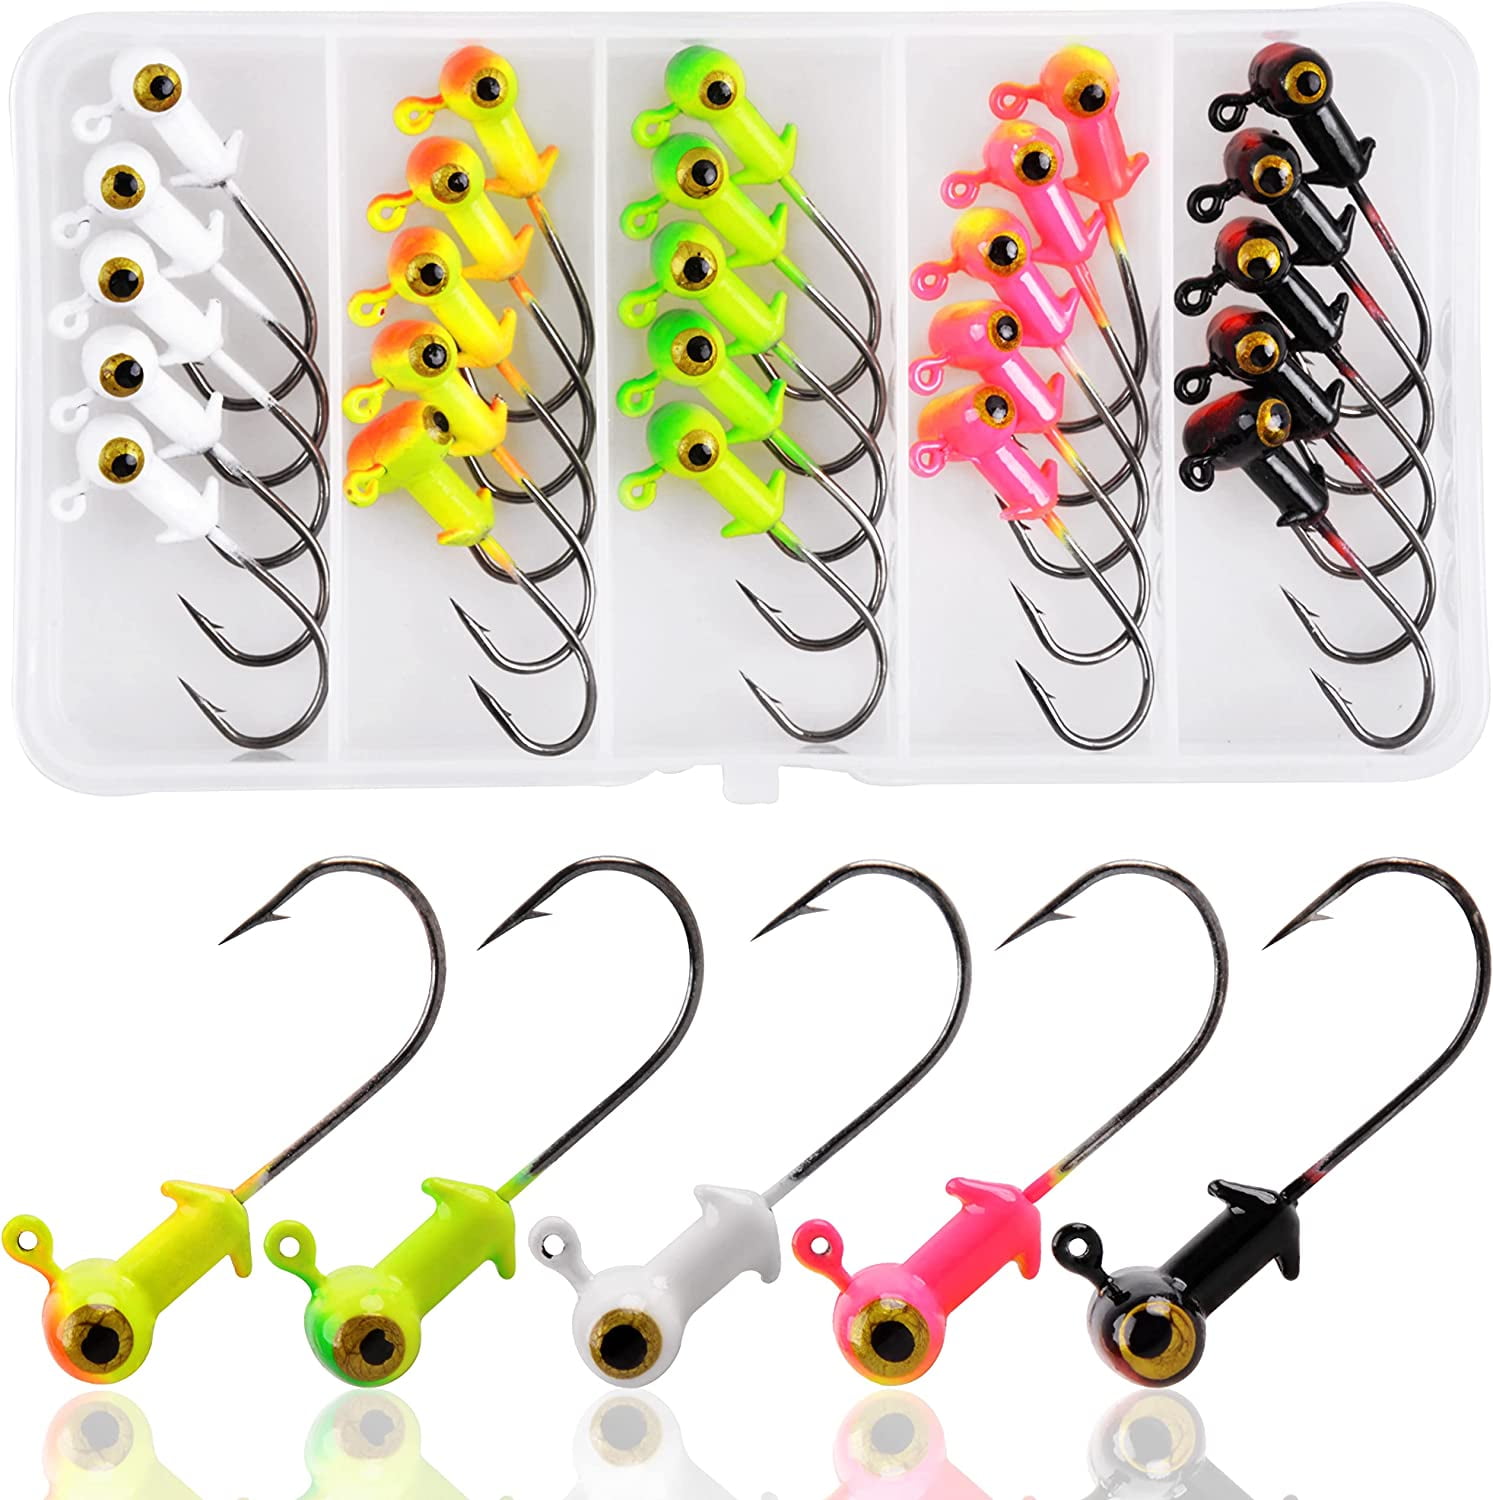 25pcs Fishing Jig Heads Kit, Football Painted Head Jig Hook with Double Eye  Glow Crappie Bass Jig Head Hooks for Freshwater Saltwater 1/8oz 3/16oz  1/4oz 